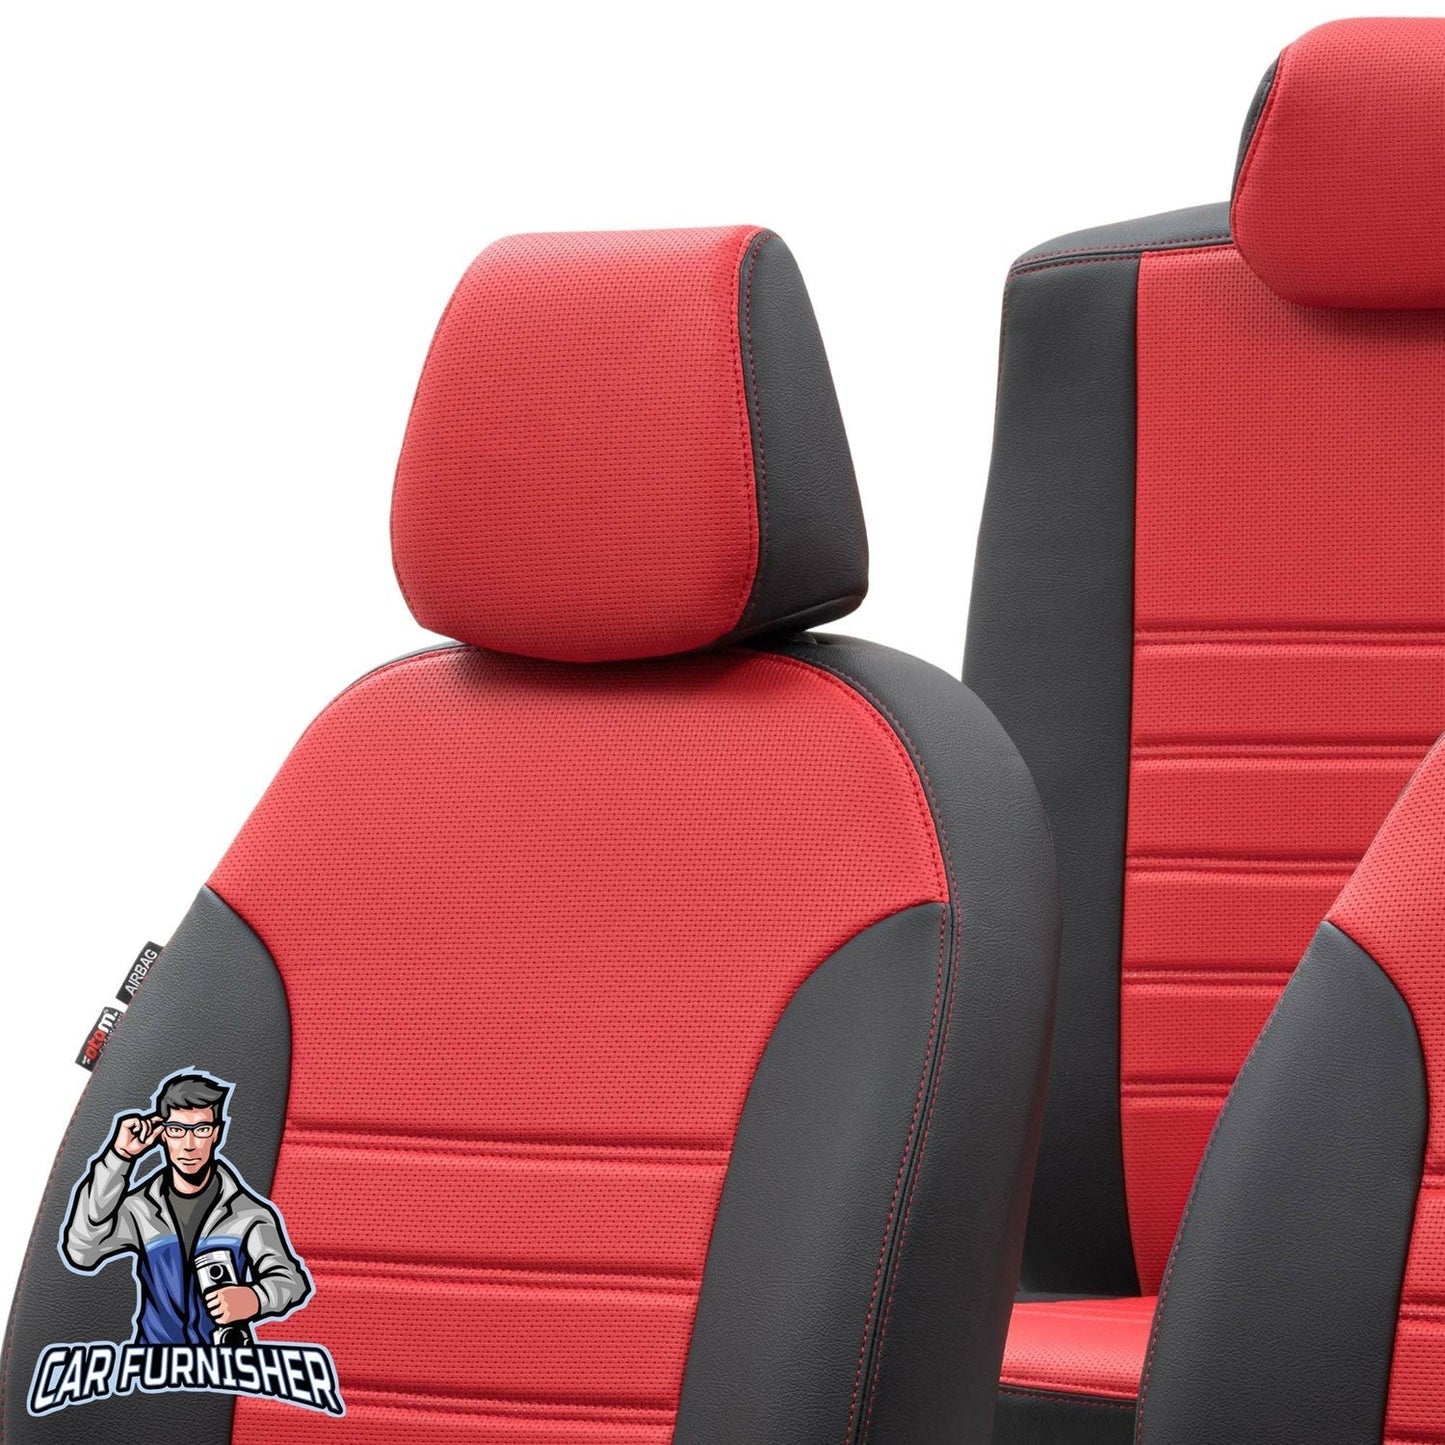 Skoda Roomster Car Seat Covers 2007-2014 New York Design Red Leather